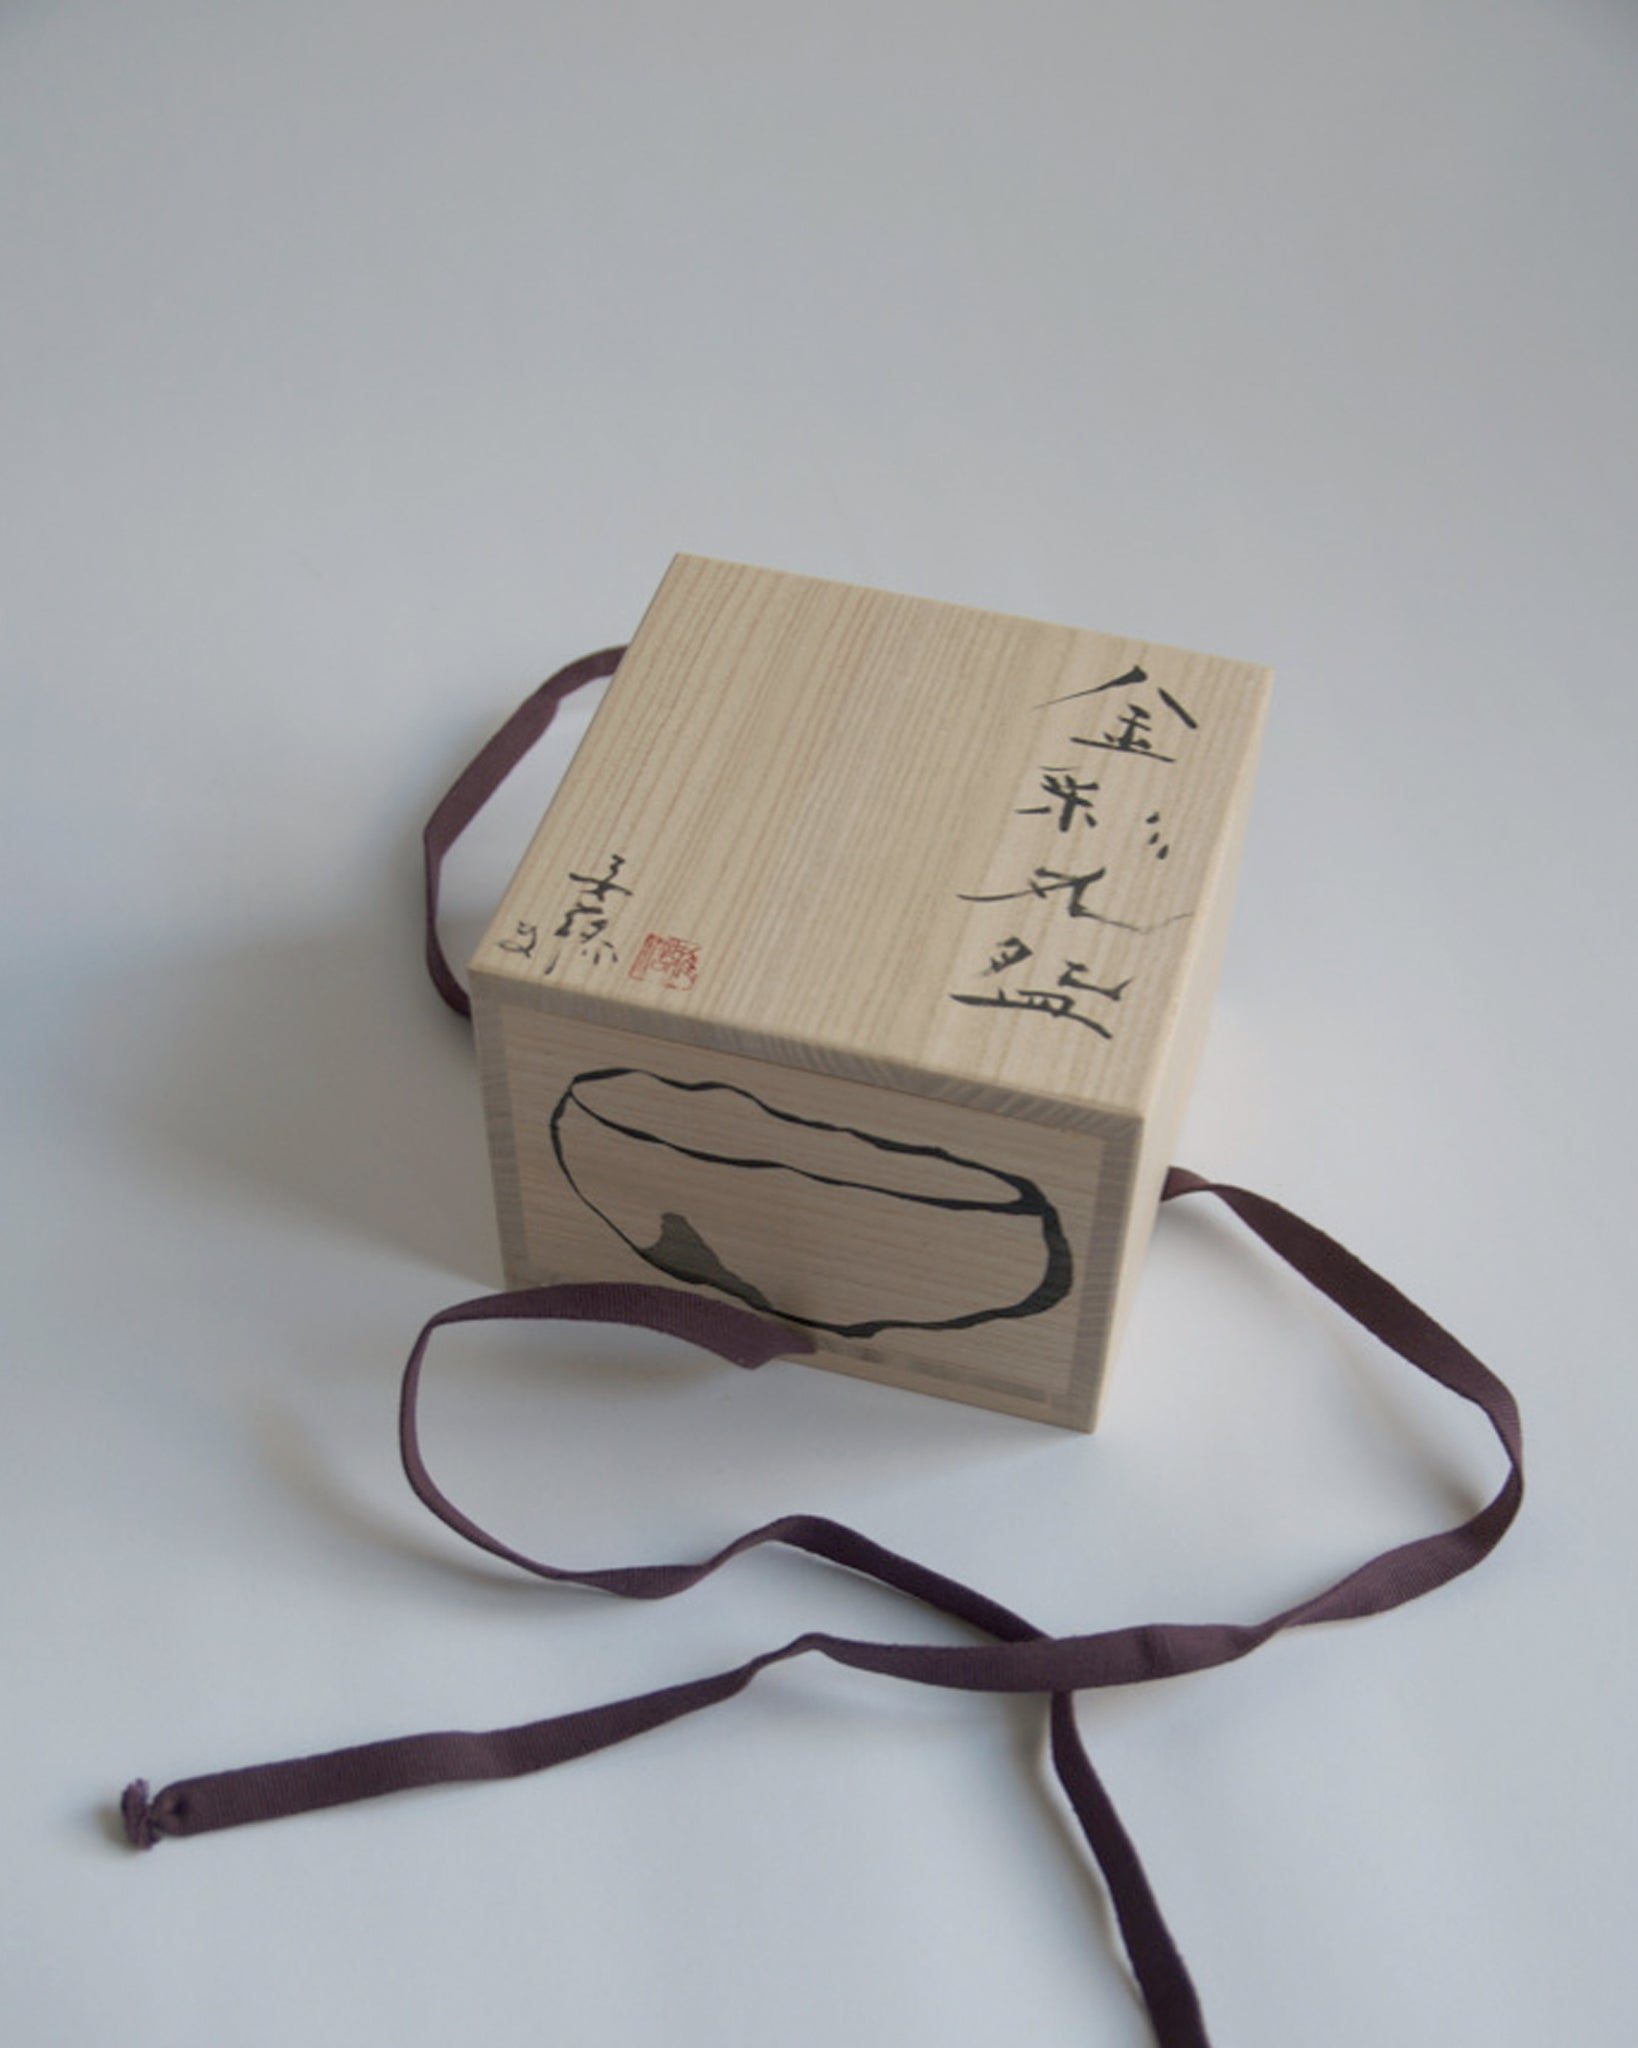 A top view of the wood box for the Gold Chawan IX. Masanobu Ando's calligraphy and drawing of the piece is shown.